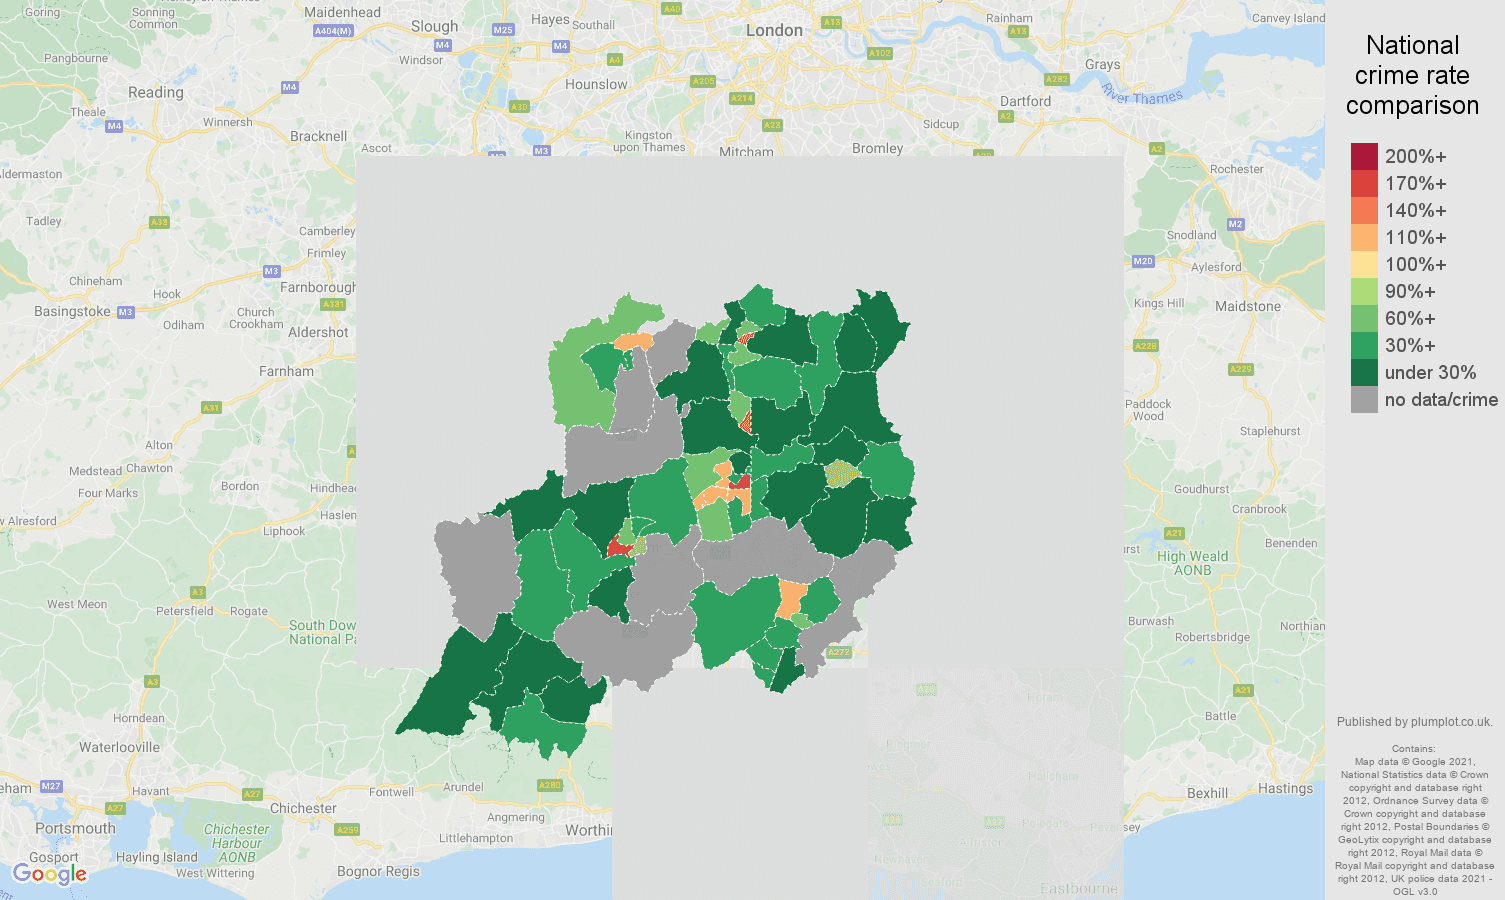 Redhill bicycle theft crime rate comparison map